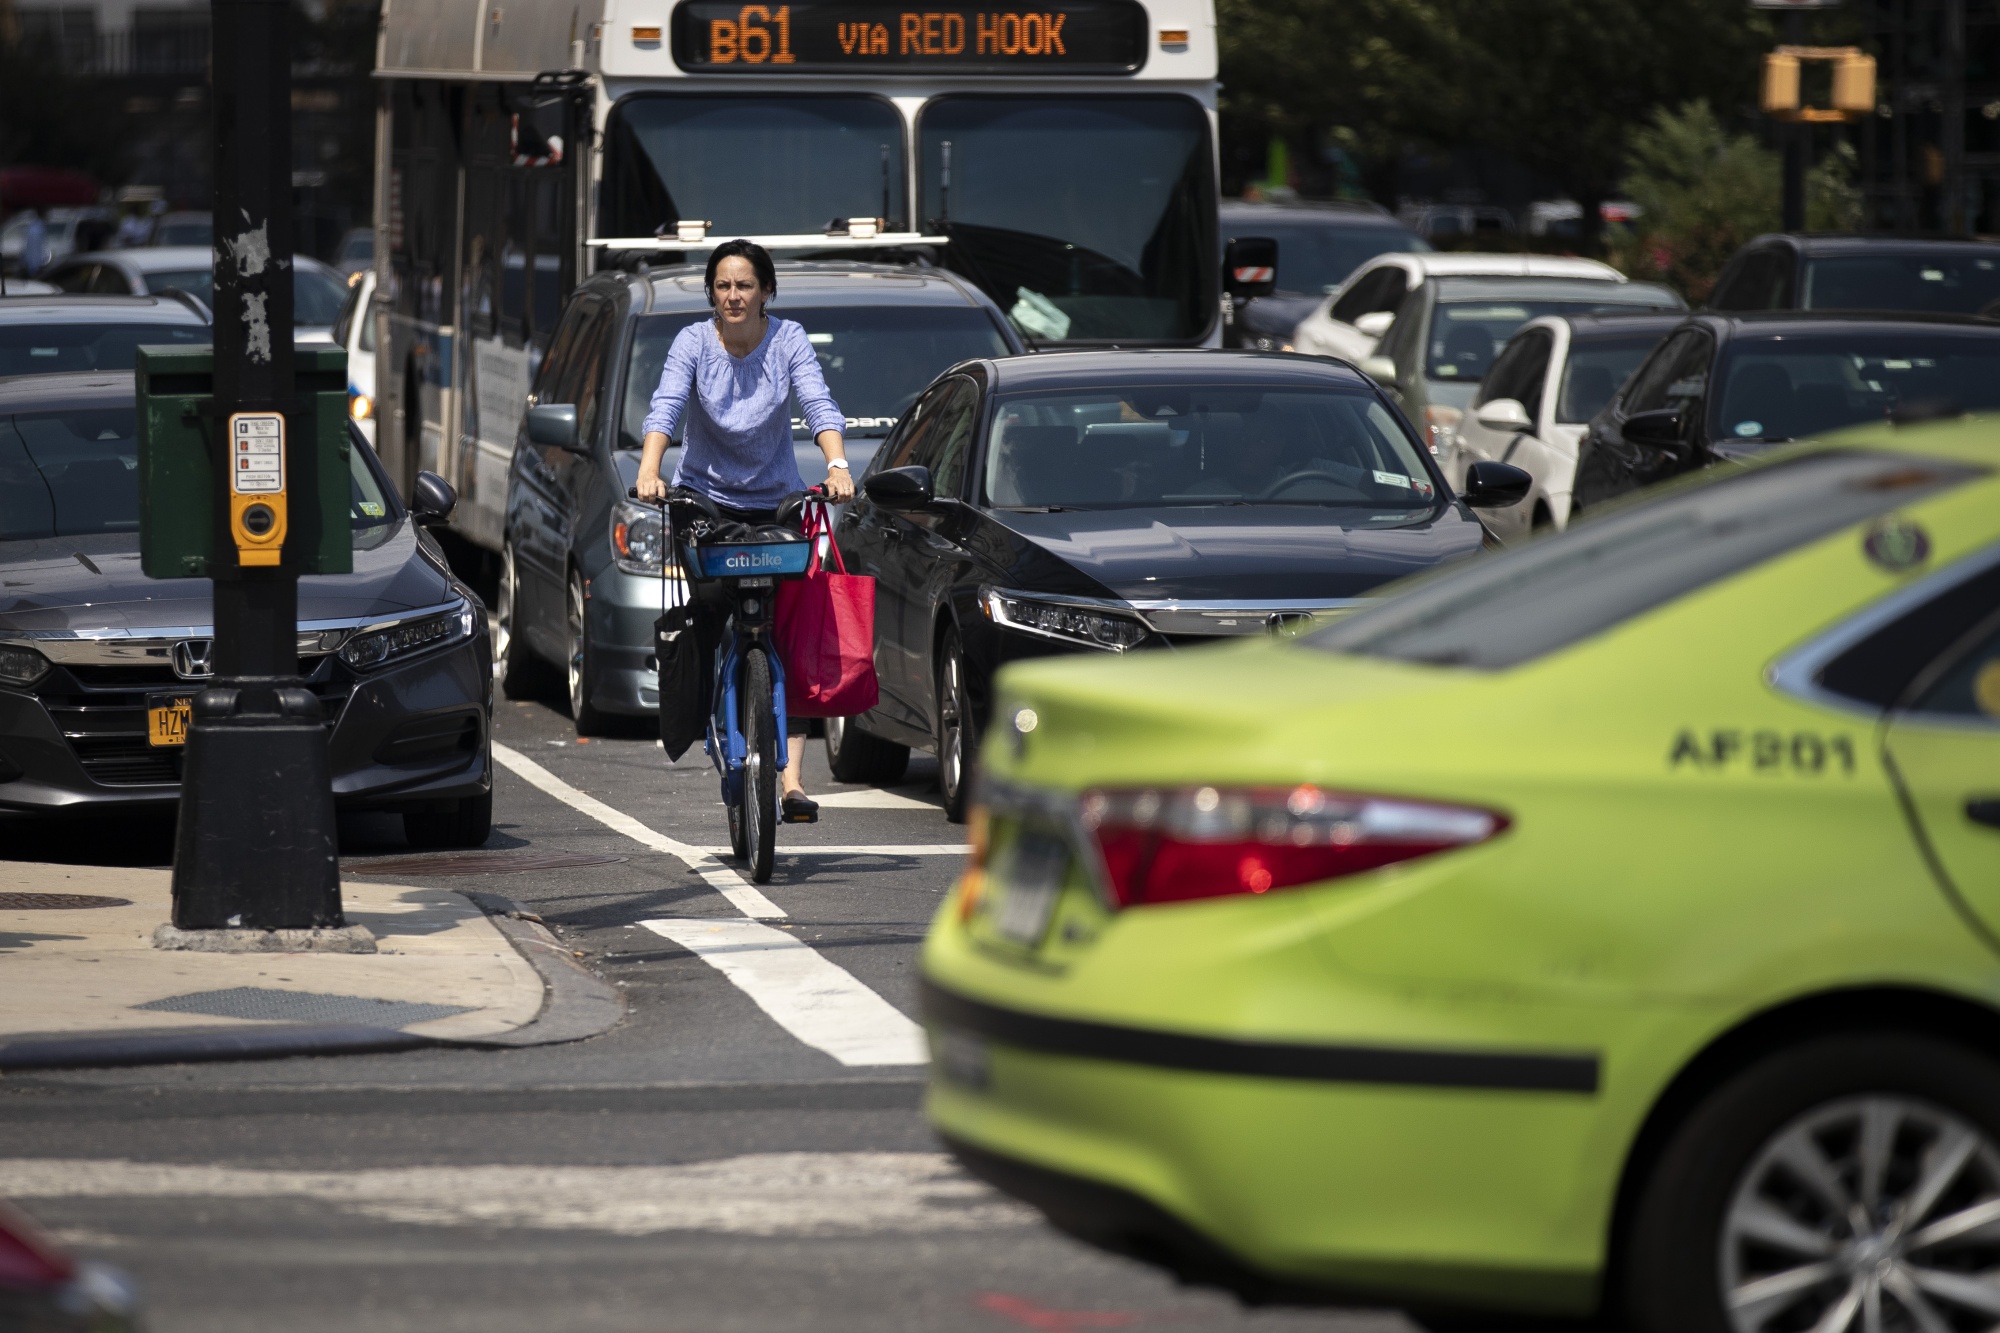 New York City's 18th Bicycle-Traffic Fatality Of 2019 Prompts New Safety Plans